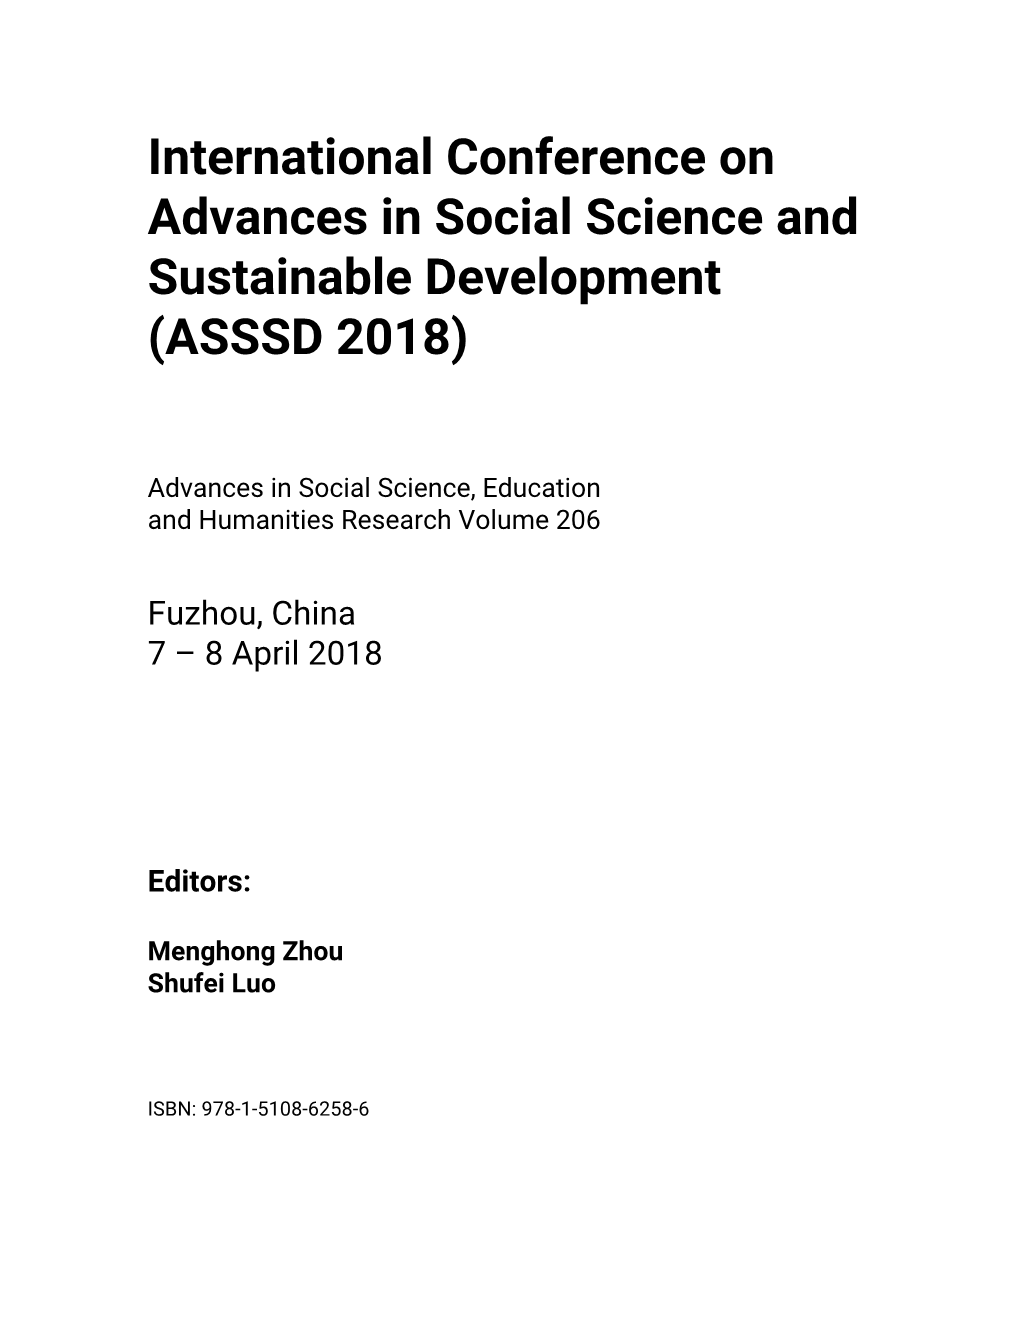 International Conference on Advances in Social Science and Sustainable Development (ASSSD 2018)